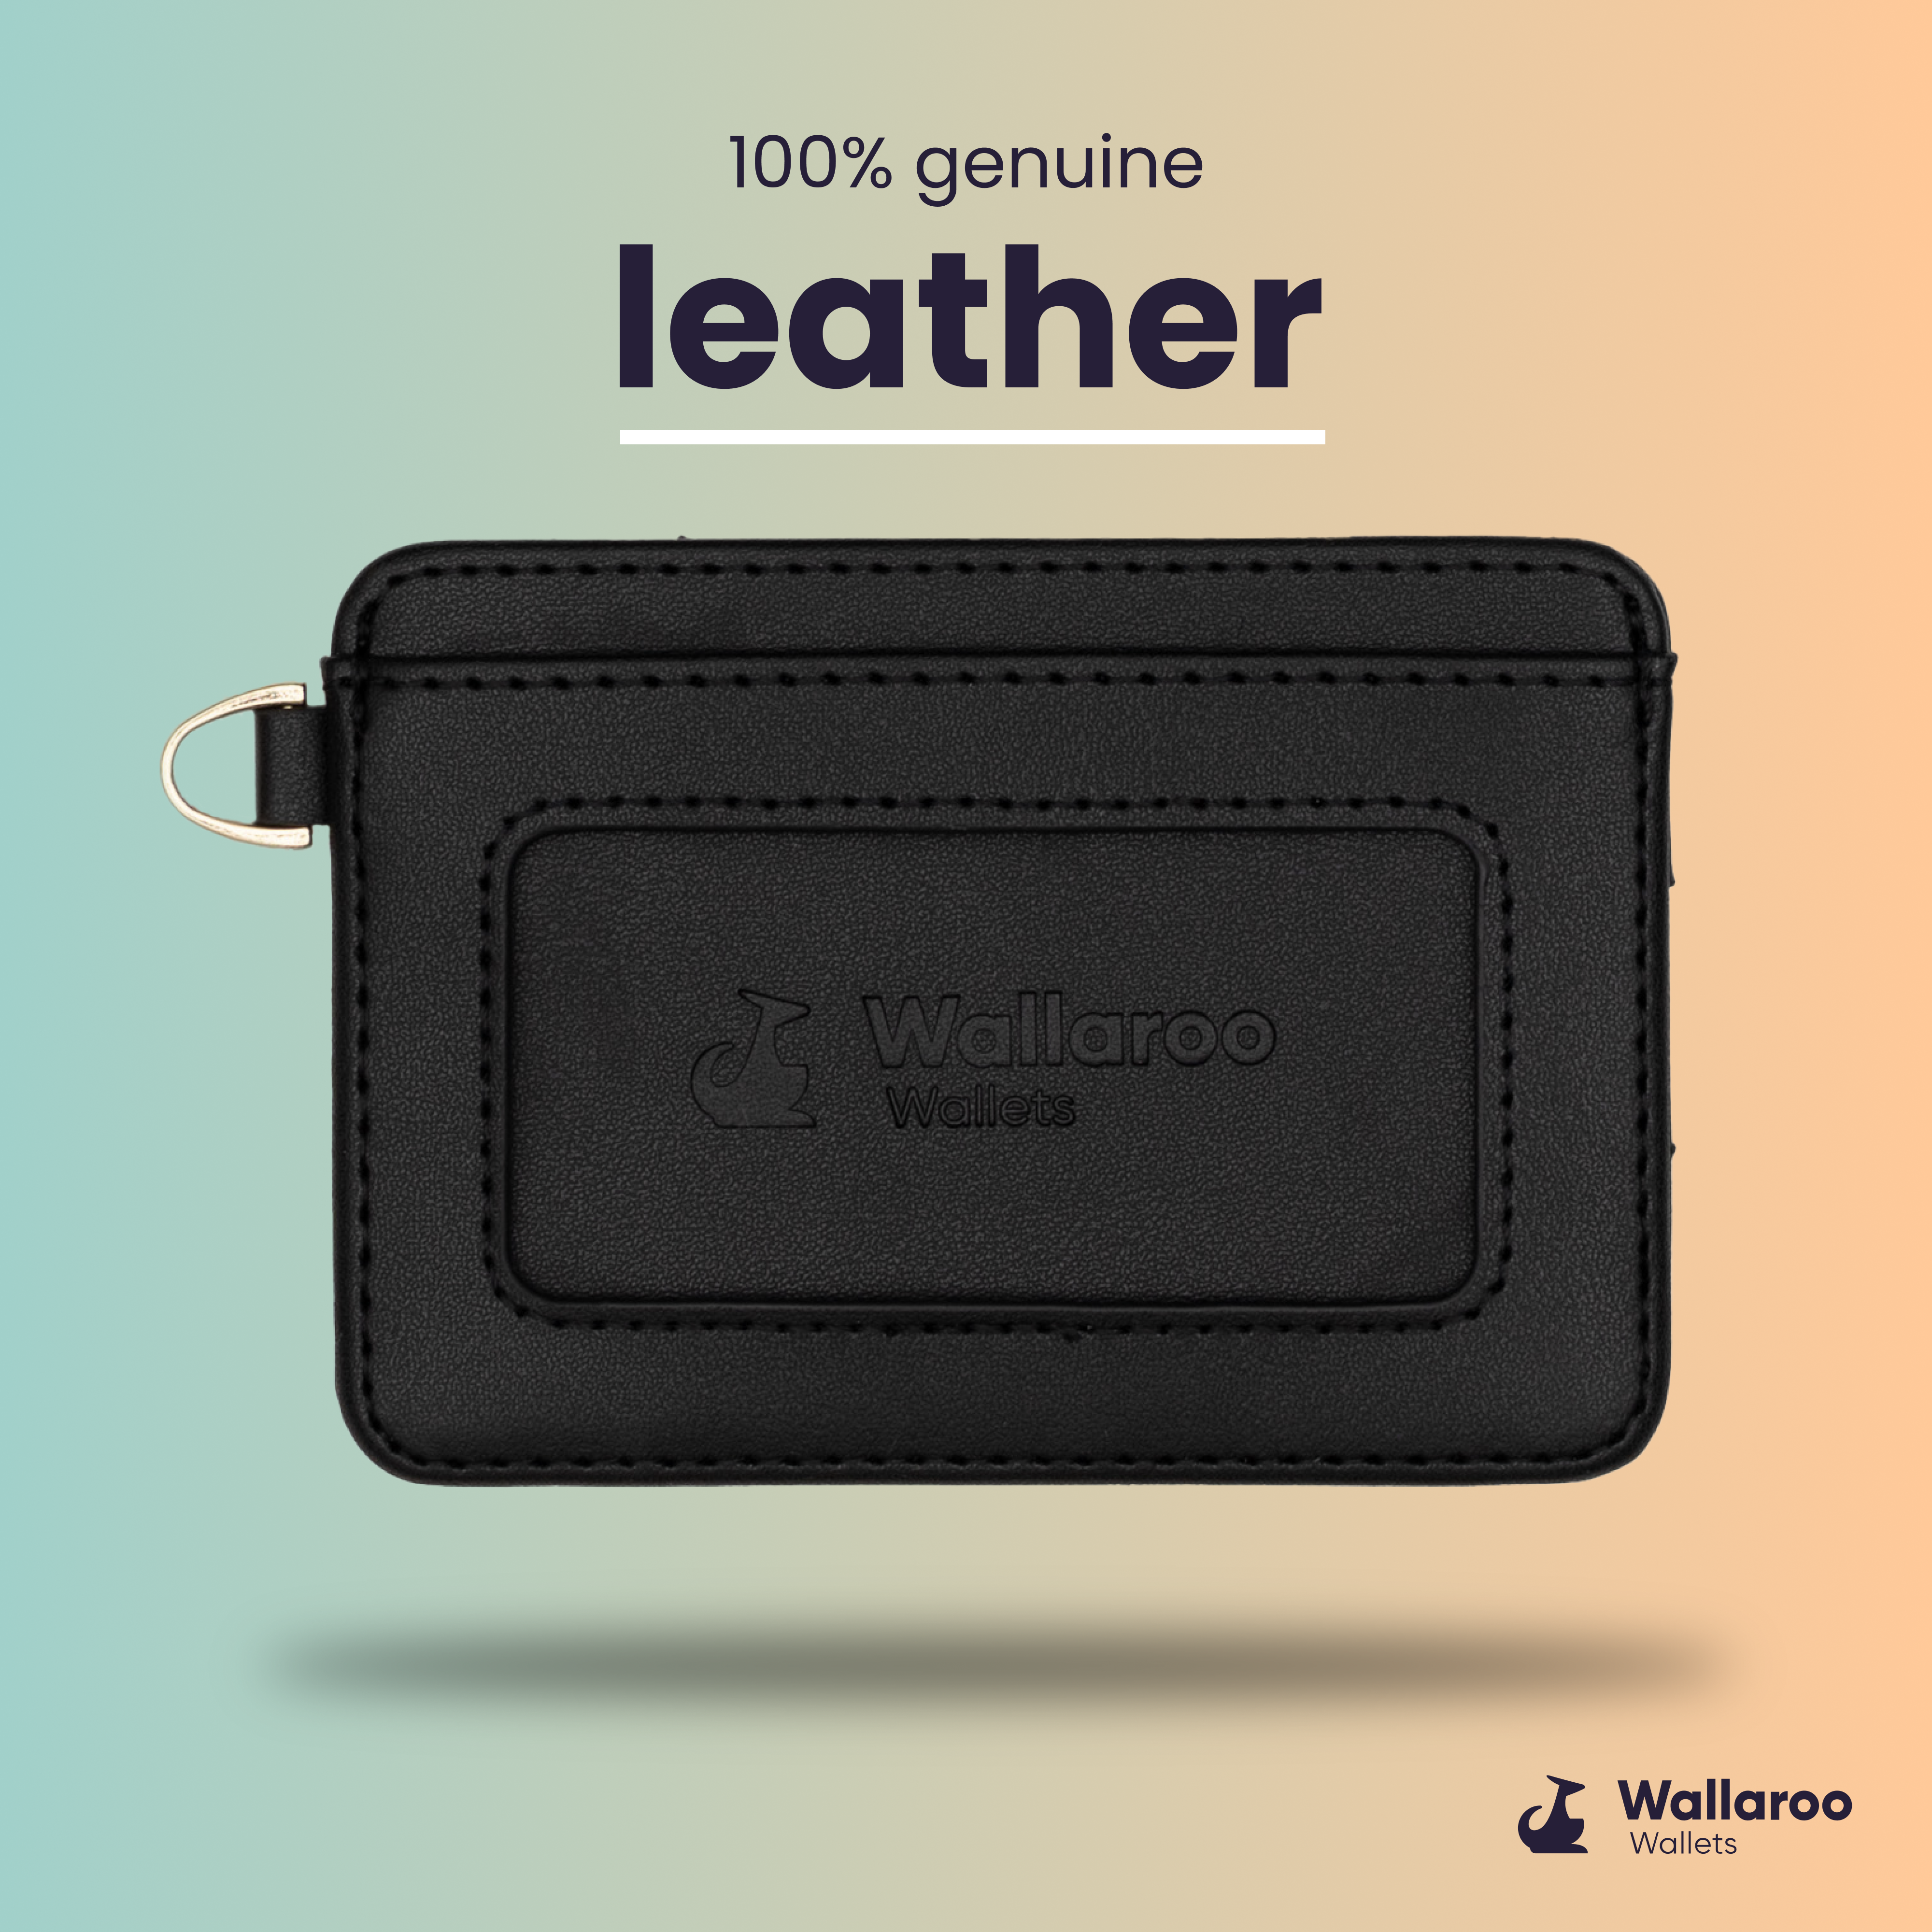 Leather wallet image